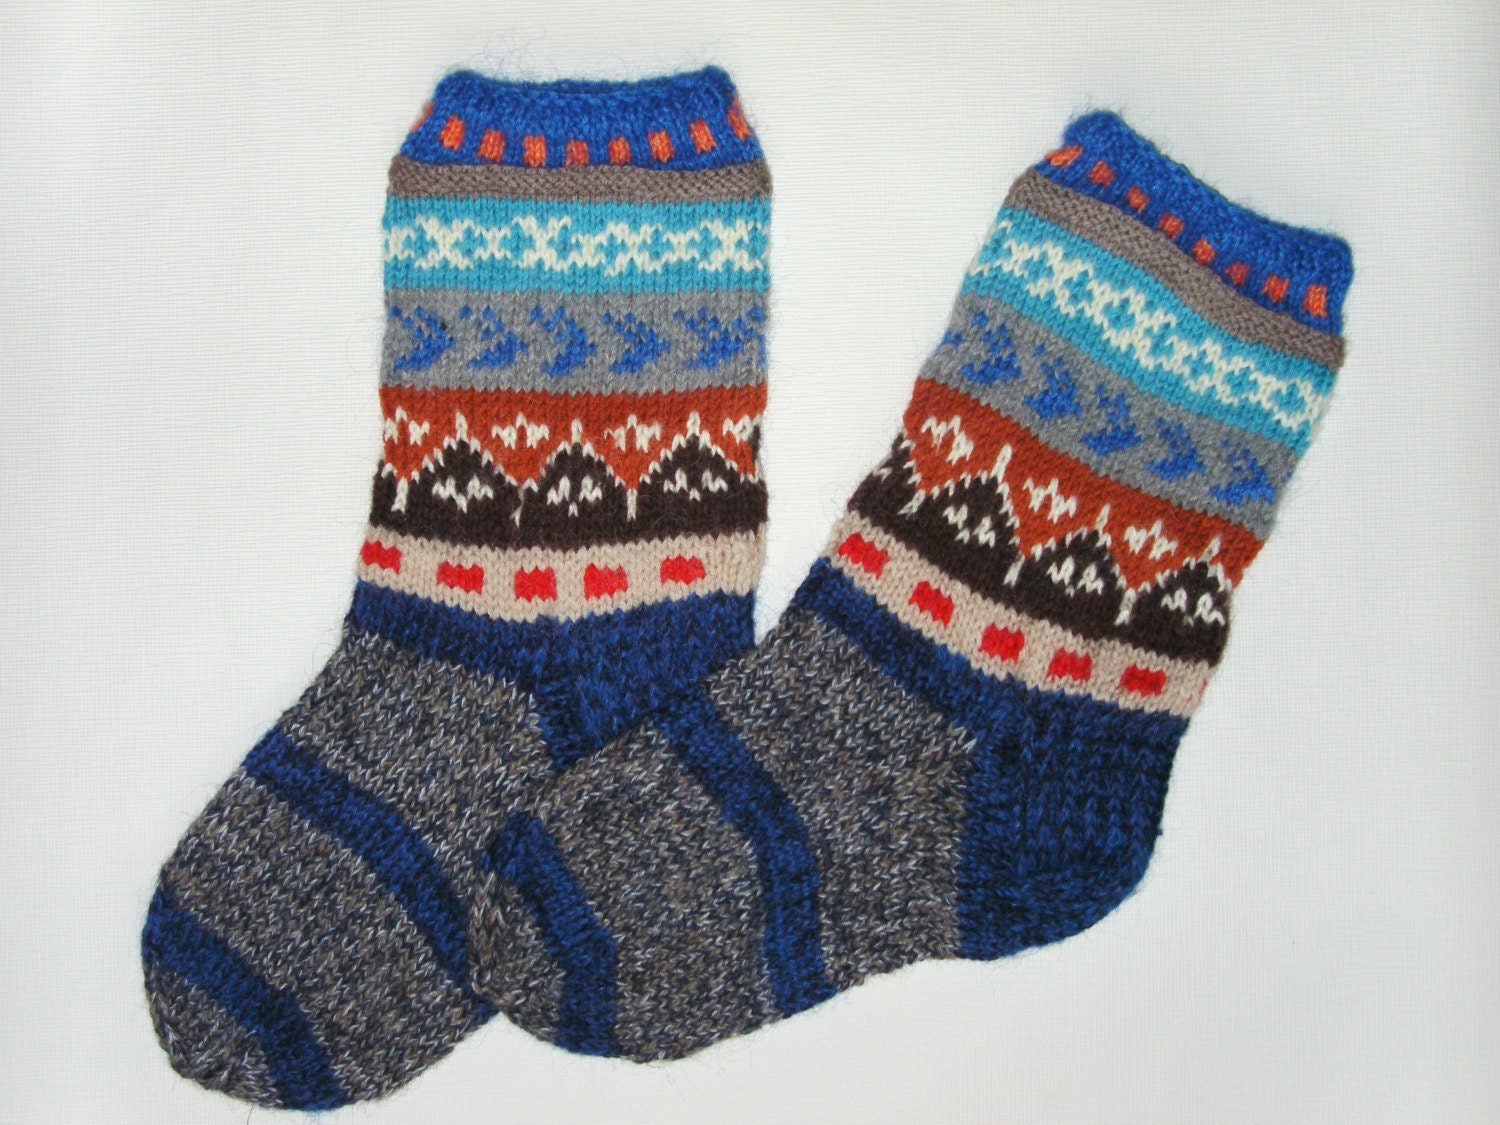 Hand Knitted Wool Socks For Men-Colorful Wool by Billeshop on Etsy